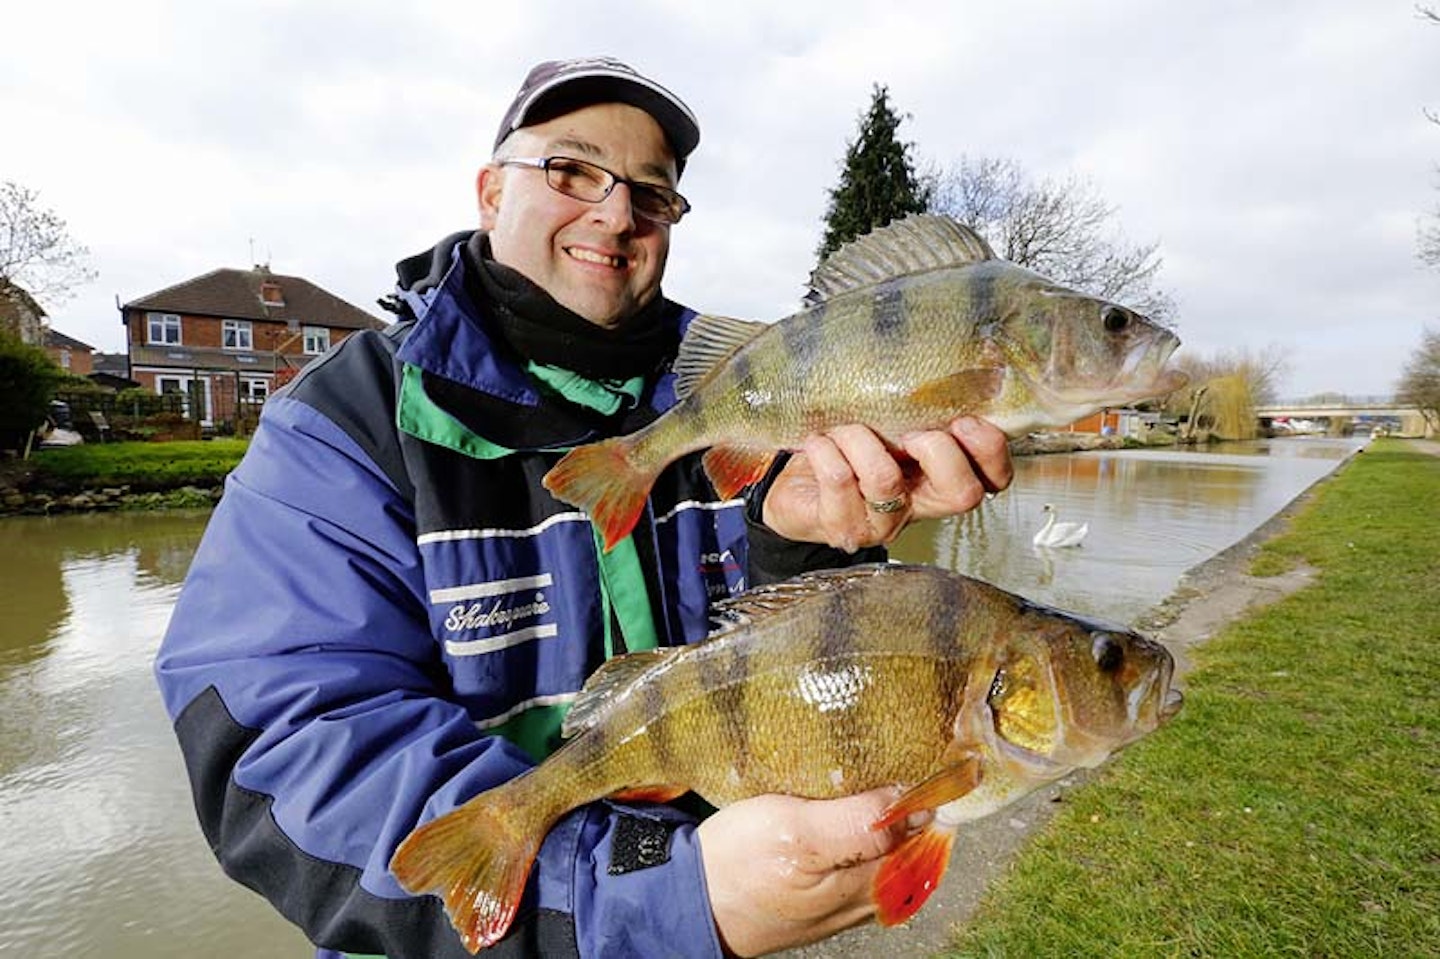 PERCH FISHING TIPS  REFINE YOUR WORM APPROACH TO CATCH MORE PERCH